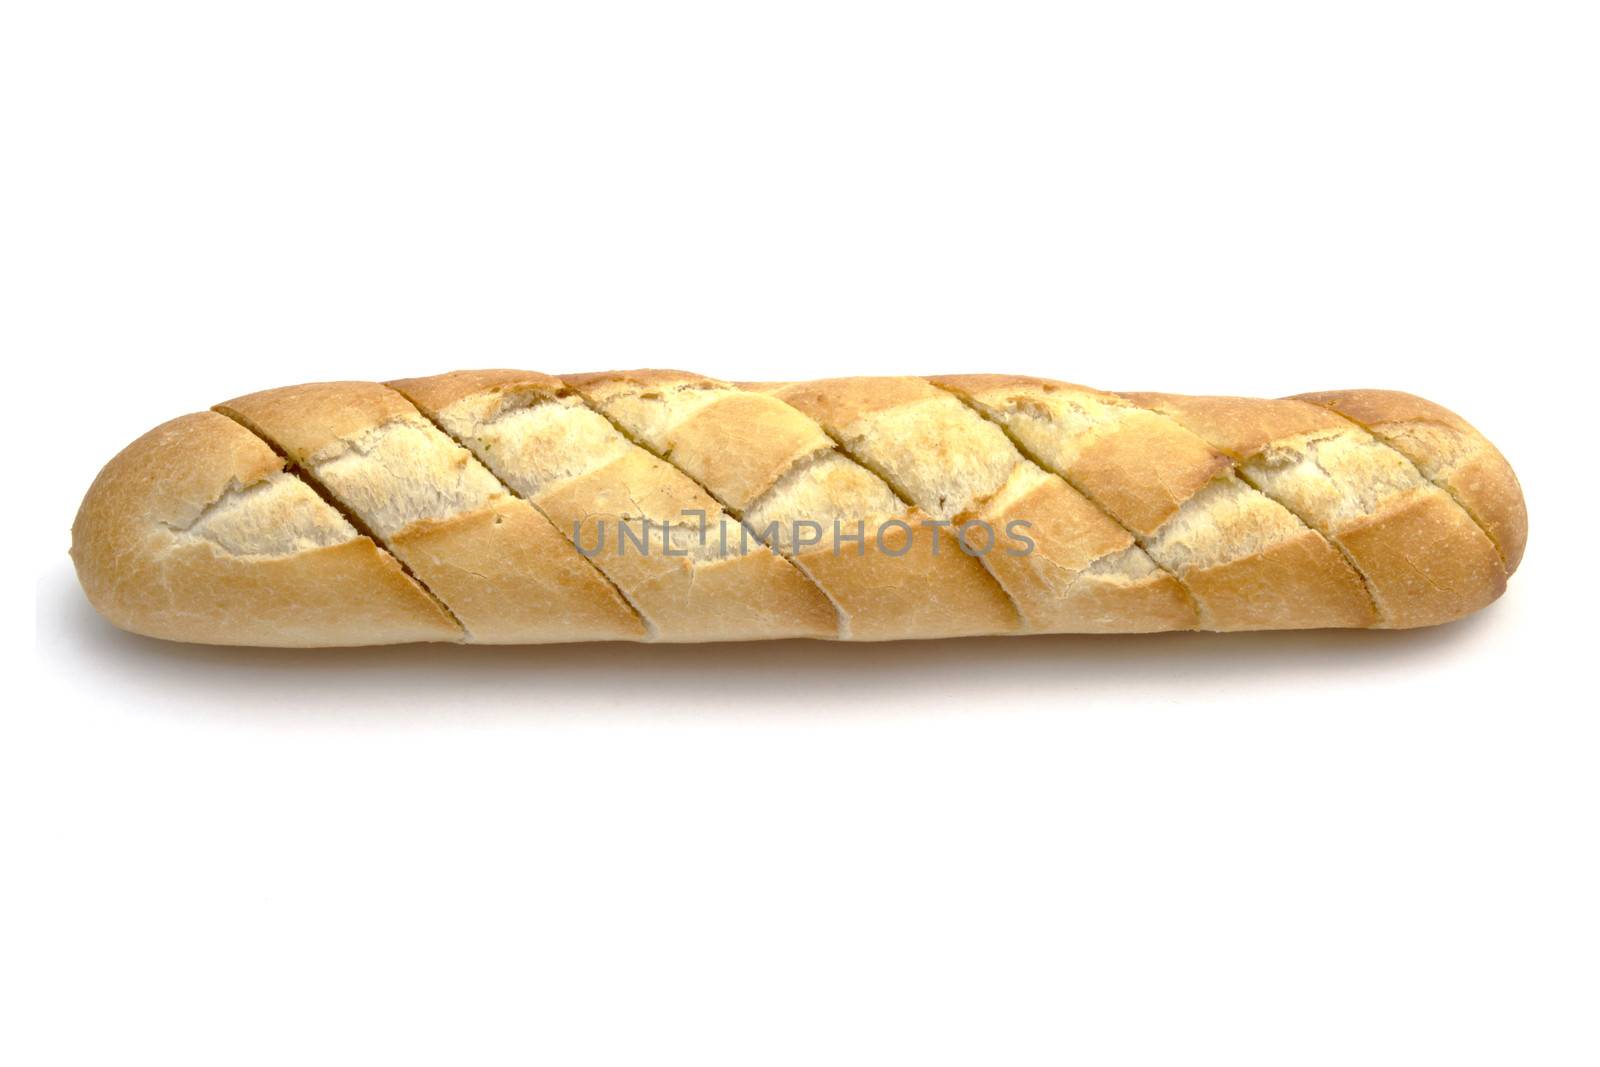 garlic baguette isolated on white background